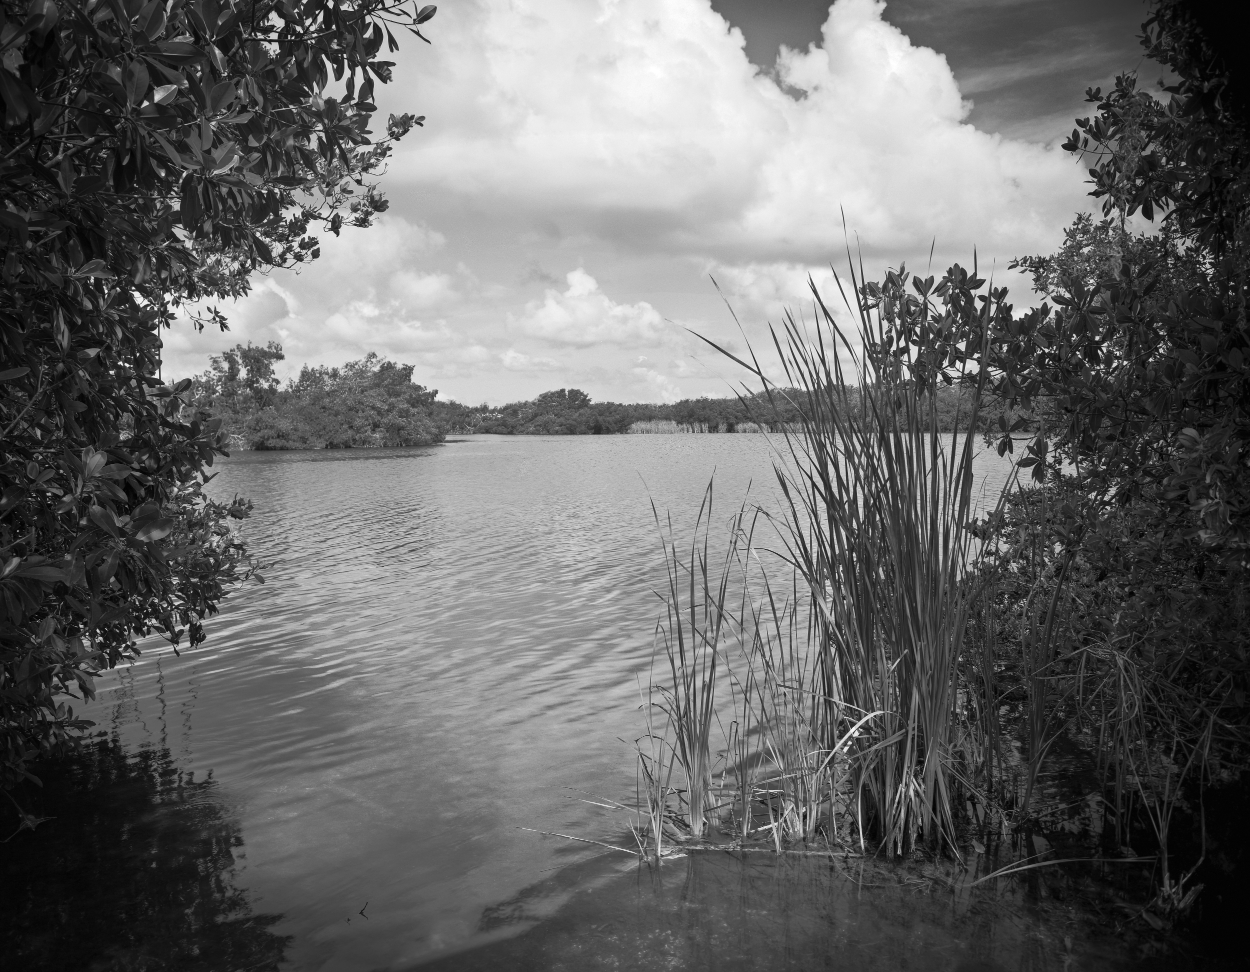 Beautiful monochrome view of the Paurotis Pond in the Florida Everglades Landscape Captured on film with a 4 x 5 inch negative size large format camera.. The Paurotis Pond is one of the main nesting areas for birds in the park.